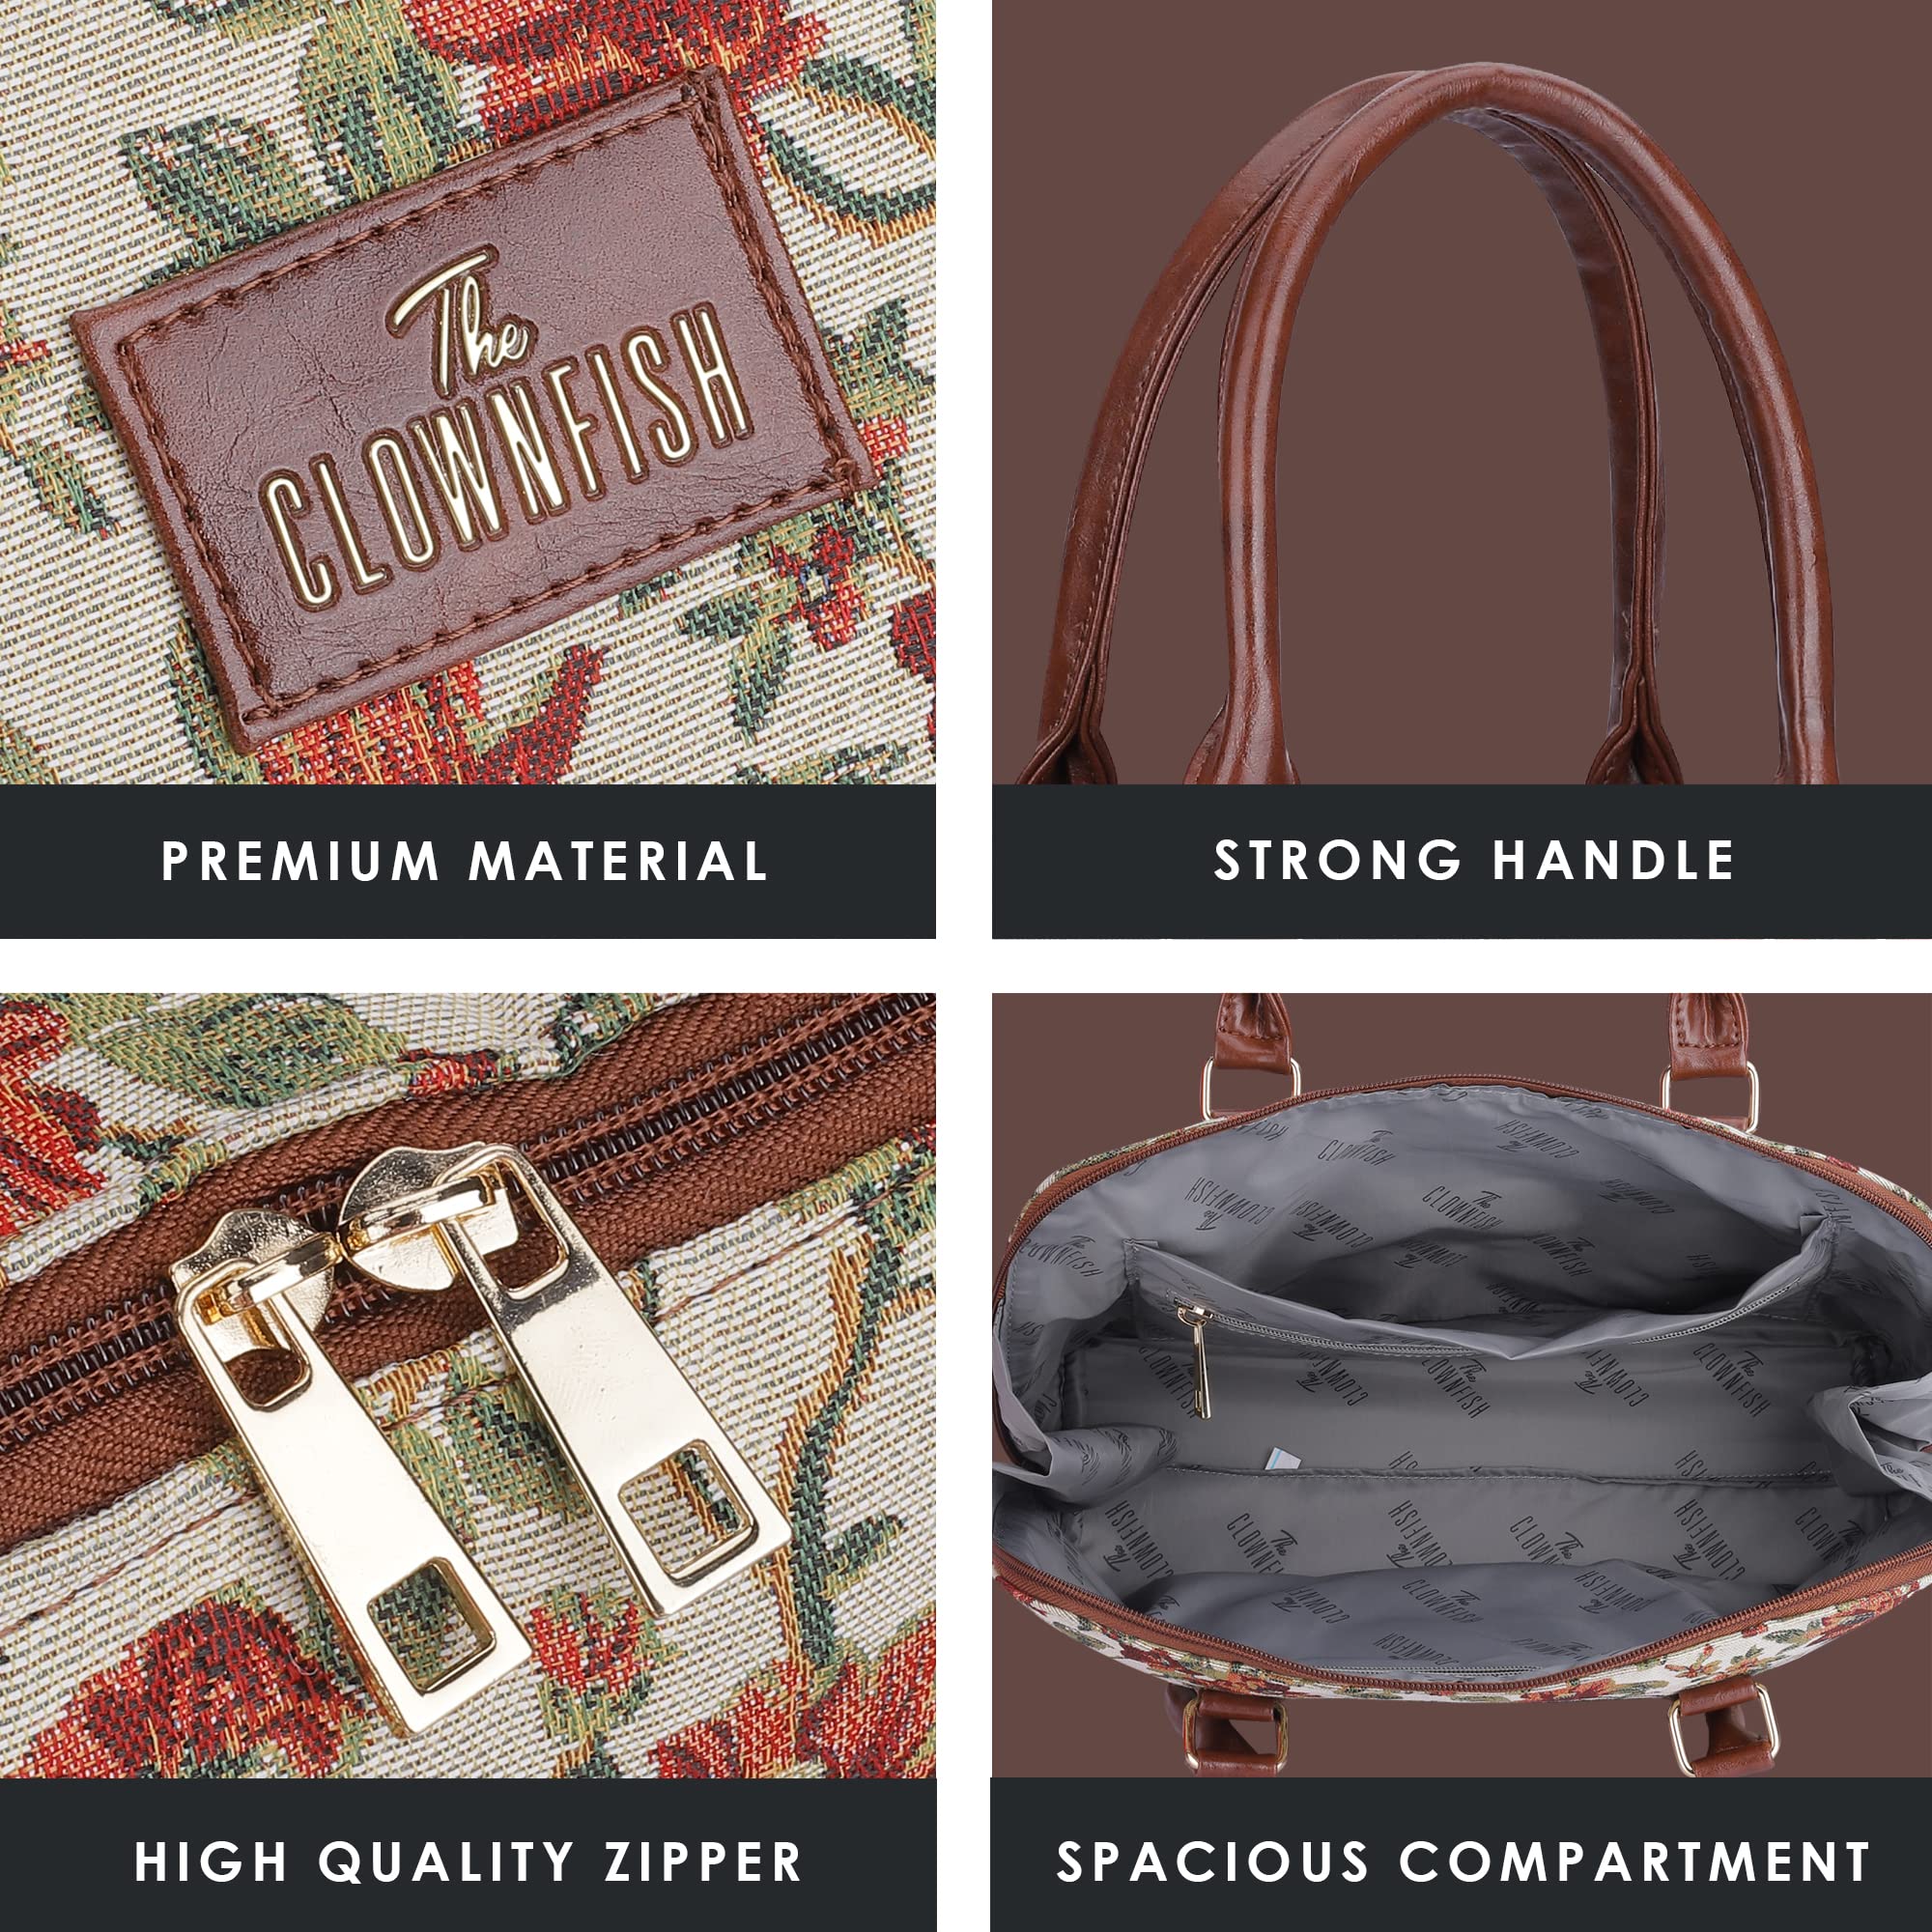 2022 Handbag Guide: 9 Types of Purses You Should Have